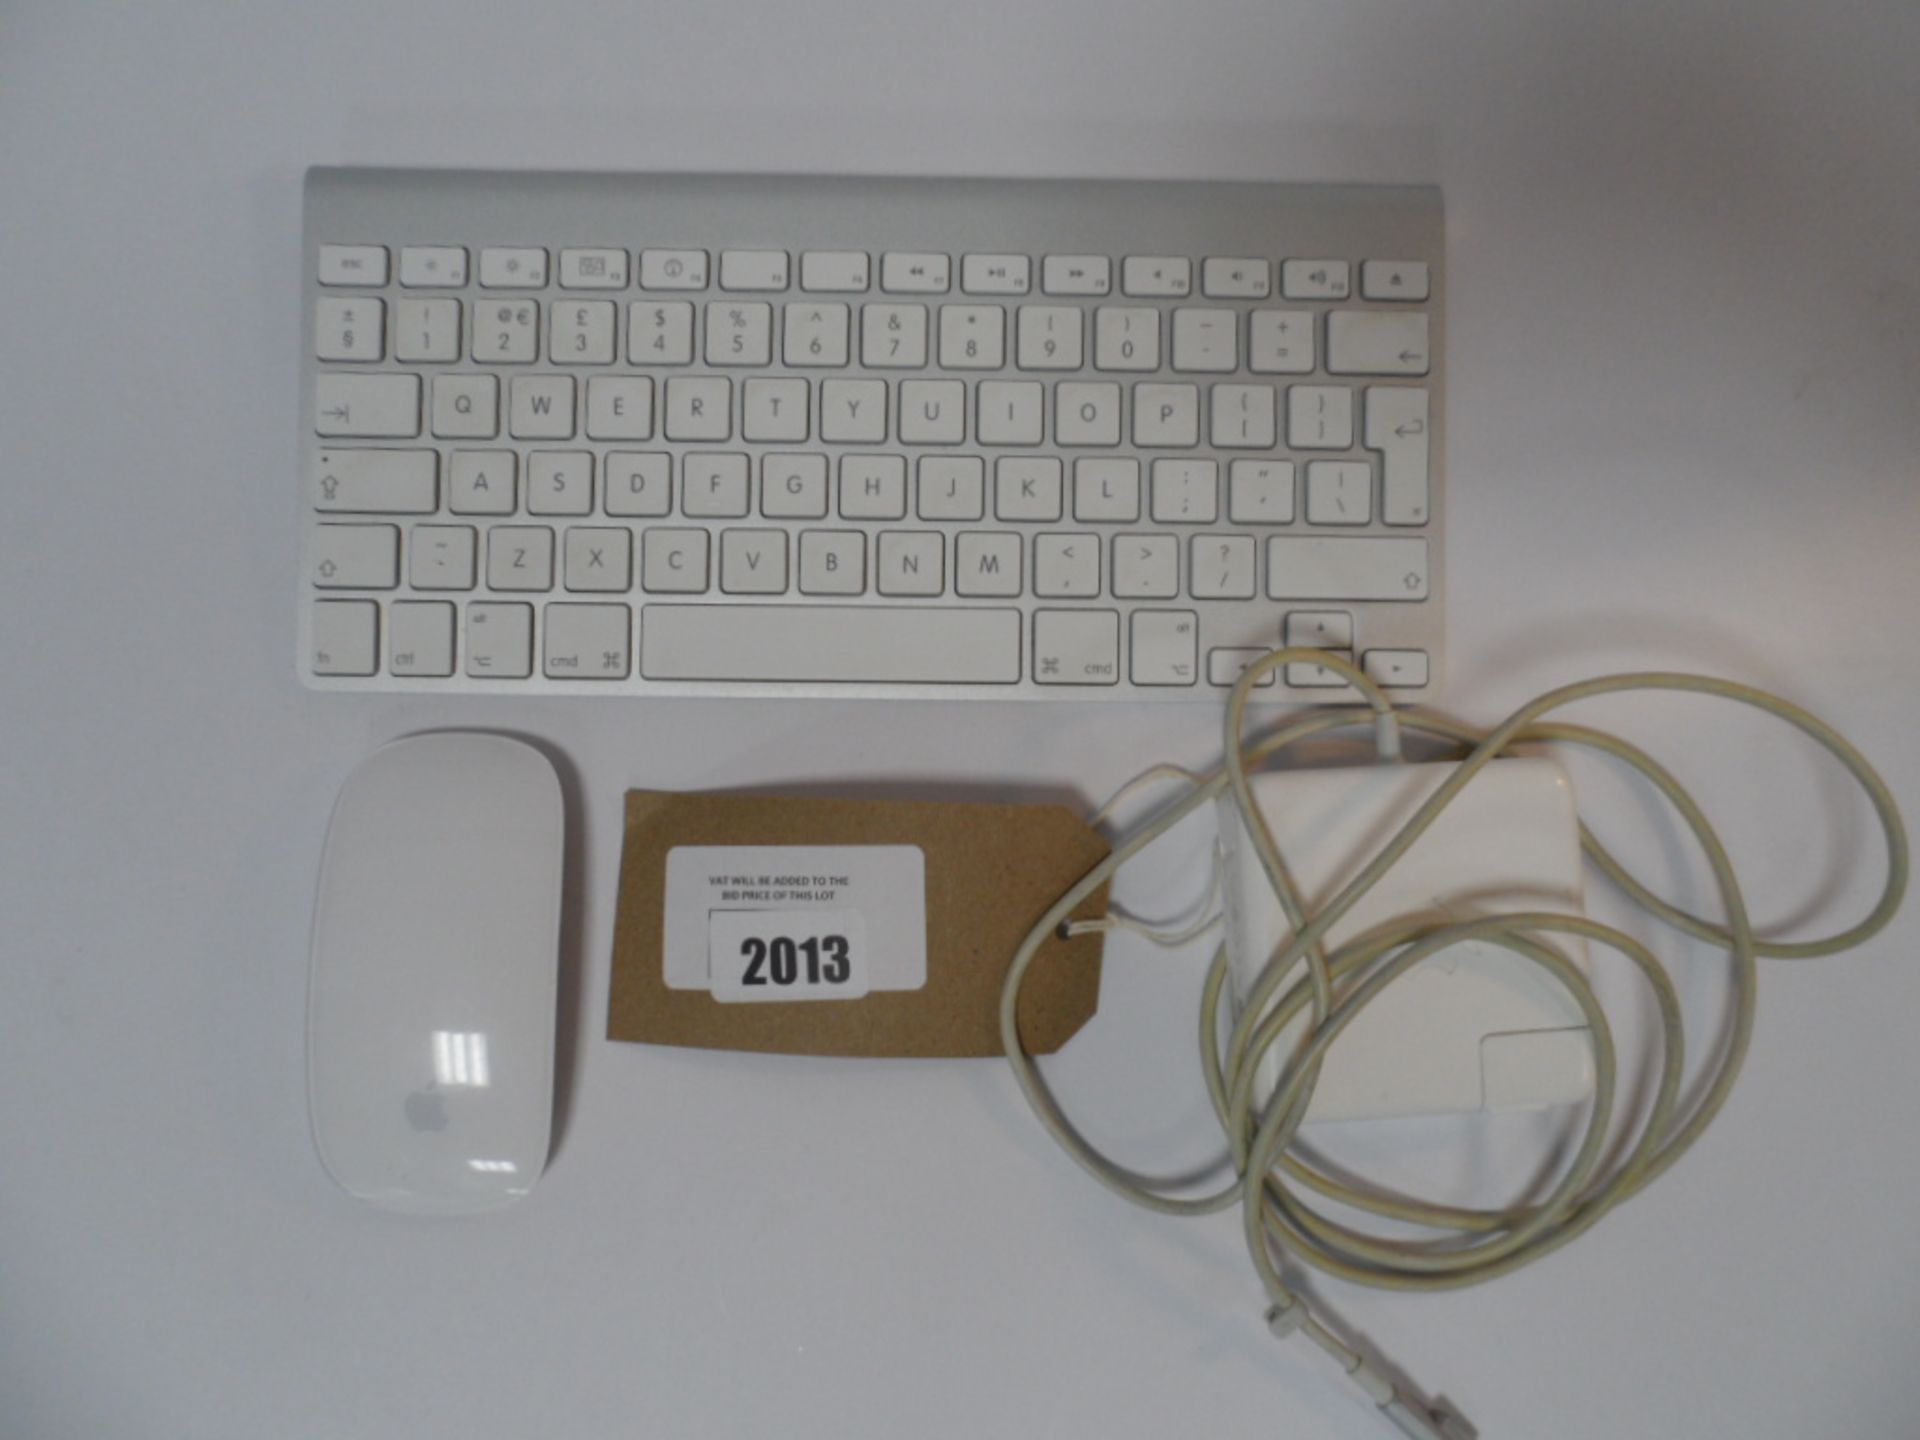 Apple A1314 keyboard, 65W Magsafe A1343 power adaptor and Magic mouse A1296.